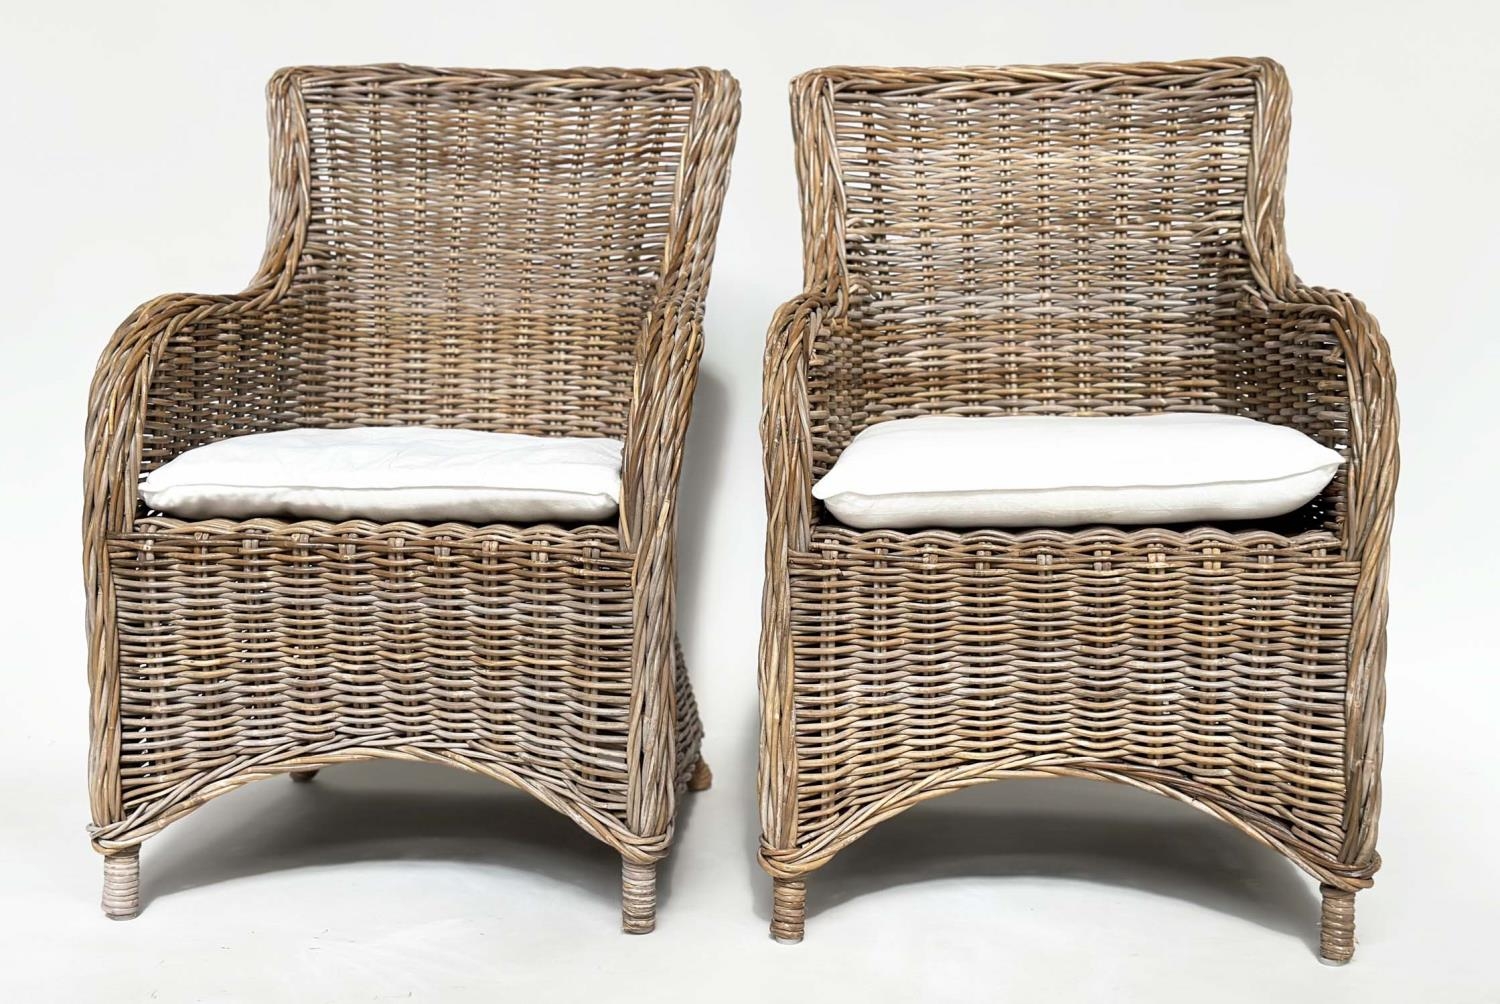 ORANGERY ARMCHAIRS, a pair, rattan framed and woven with cushion seats. (2) - Image 2 of 15